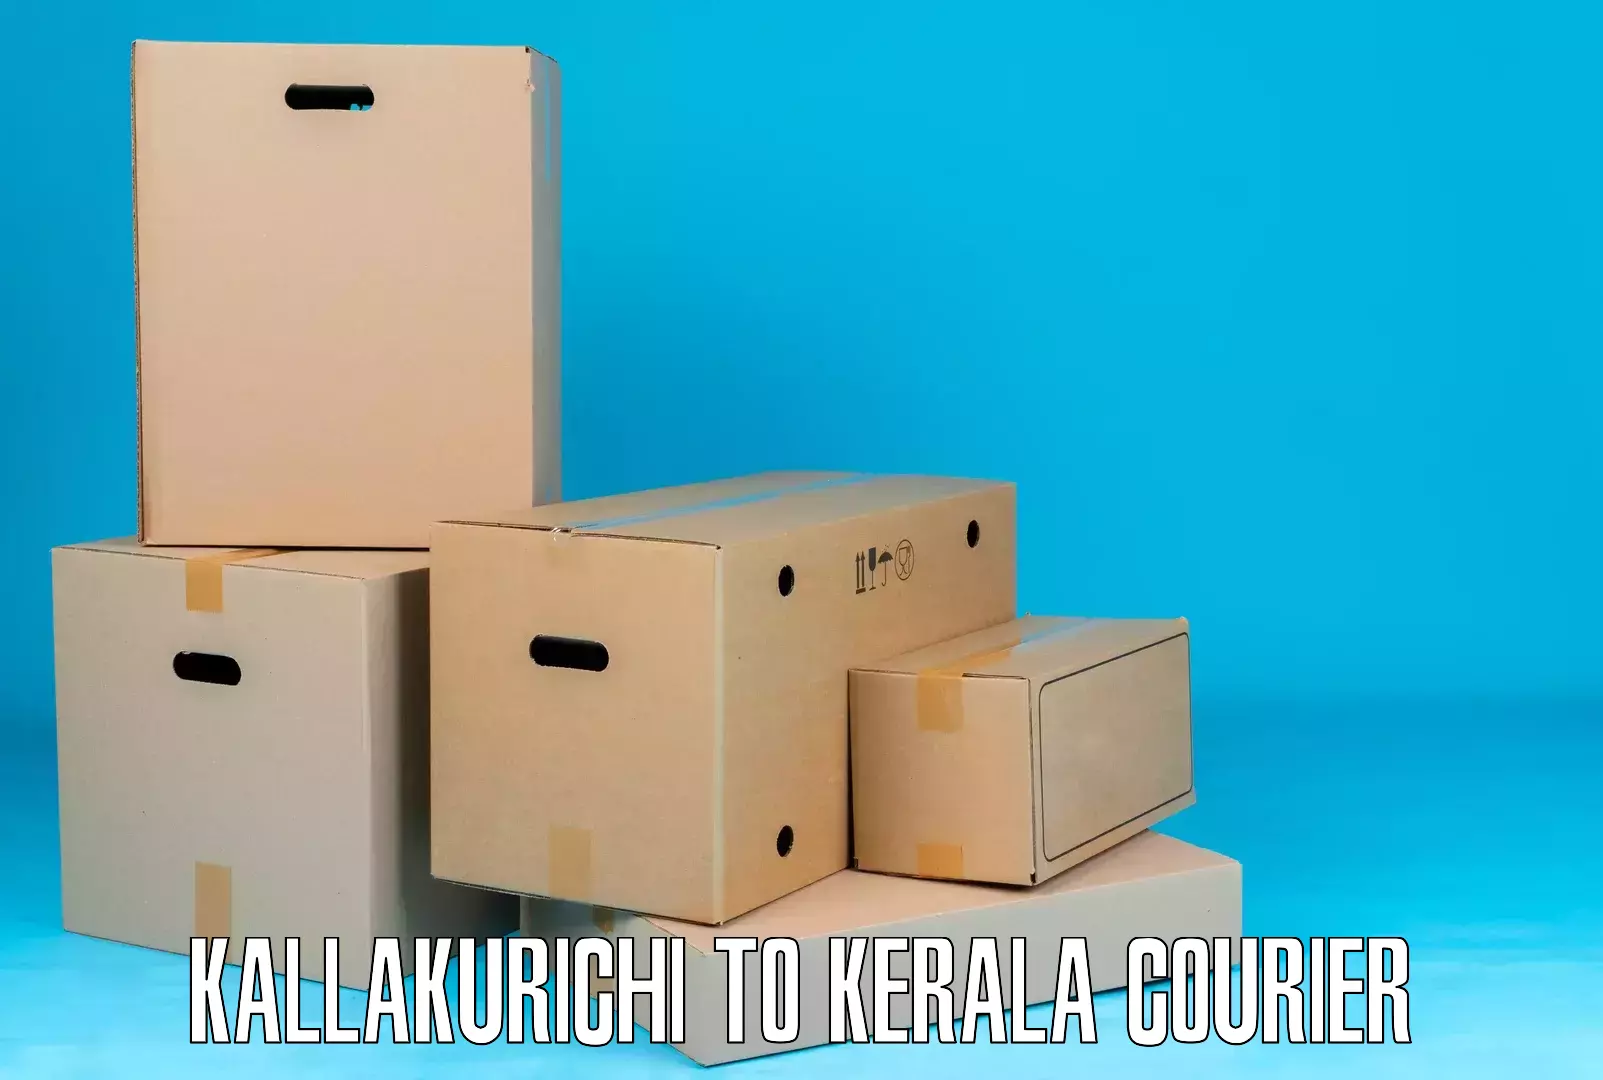 Large-scale shipping solutions Kallakurichi to Cochin